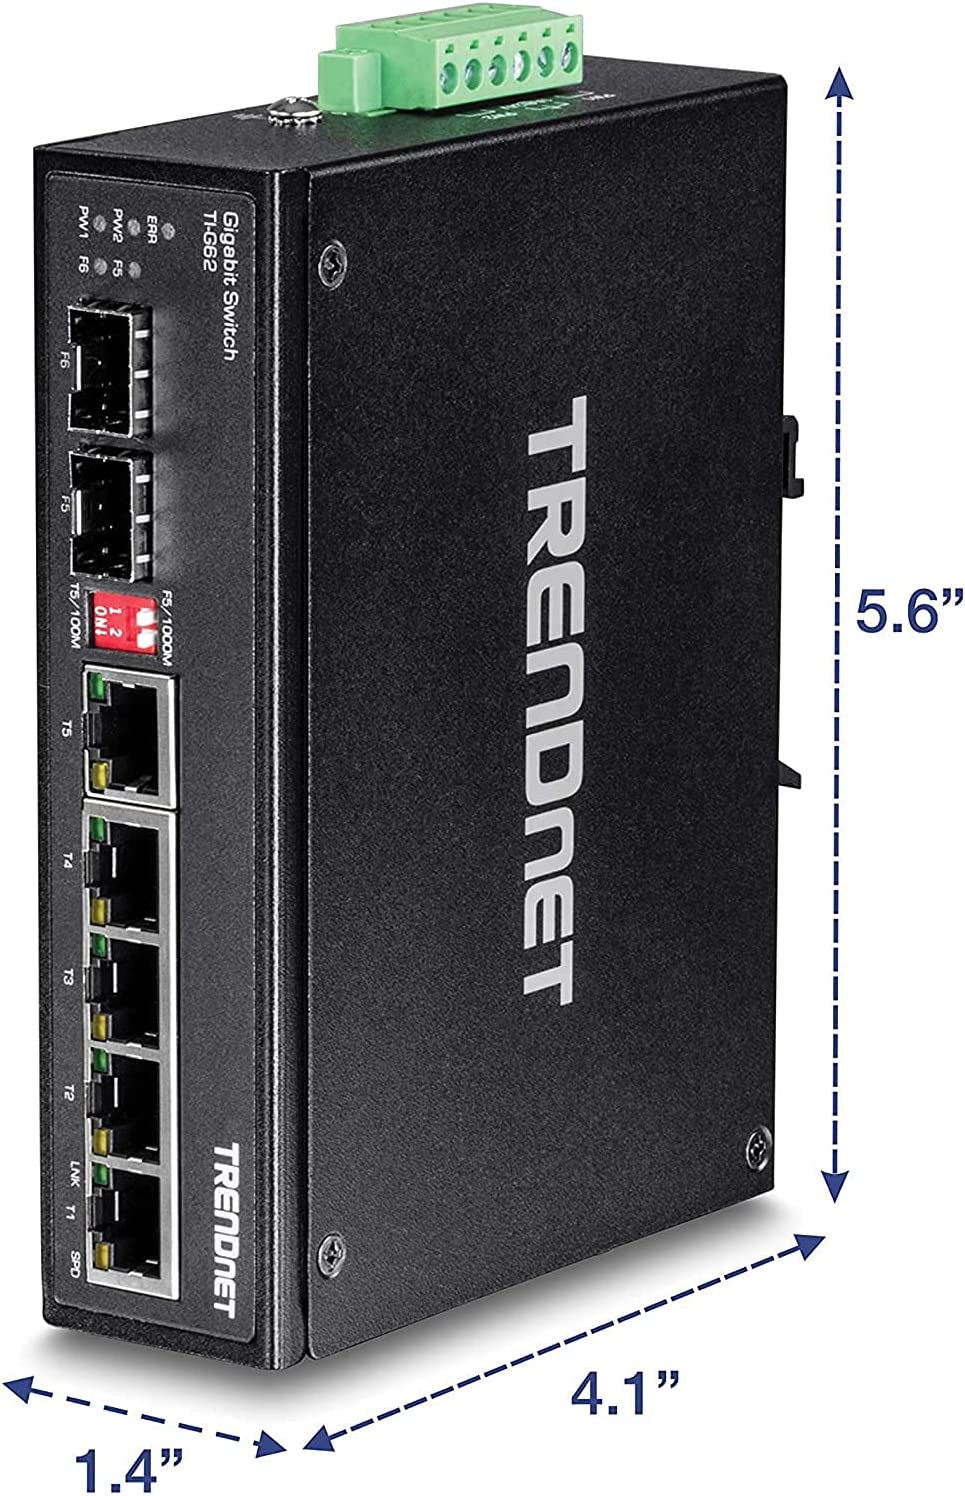 TRENDnet 6-Port Hardened Industrial Gigabit DIN-Rail Switch, 12 Gbps Switching Capacity, IP30 Rated Metal Housing (-40 to 167 ºF),DIN-Rail &amp; Wall Mounts Included,Lifetime Protection,Black,TI-G62